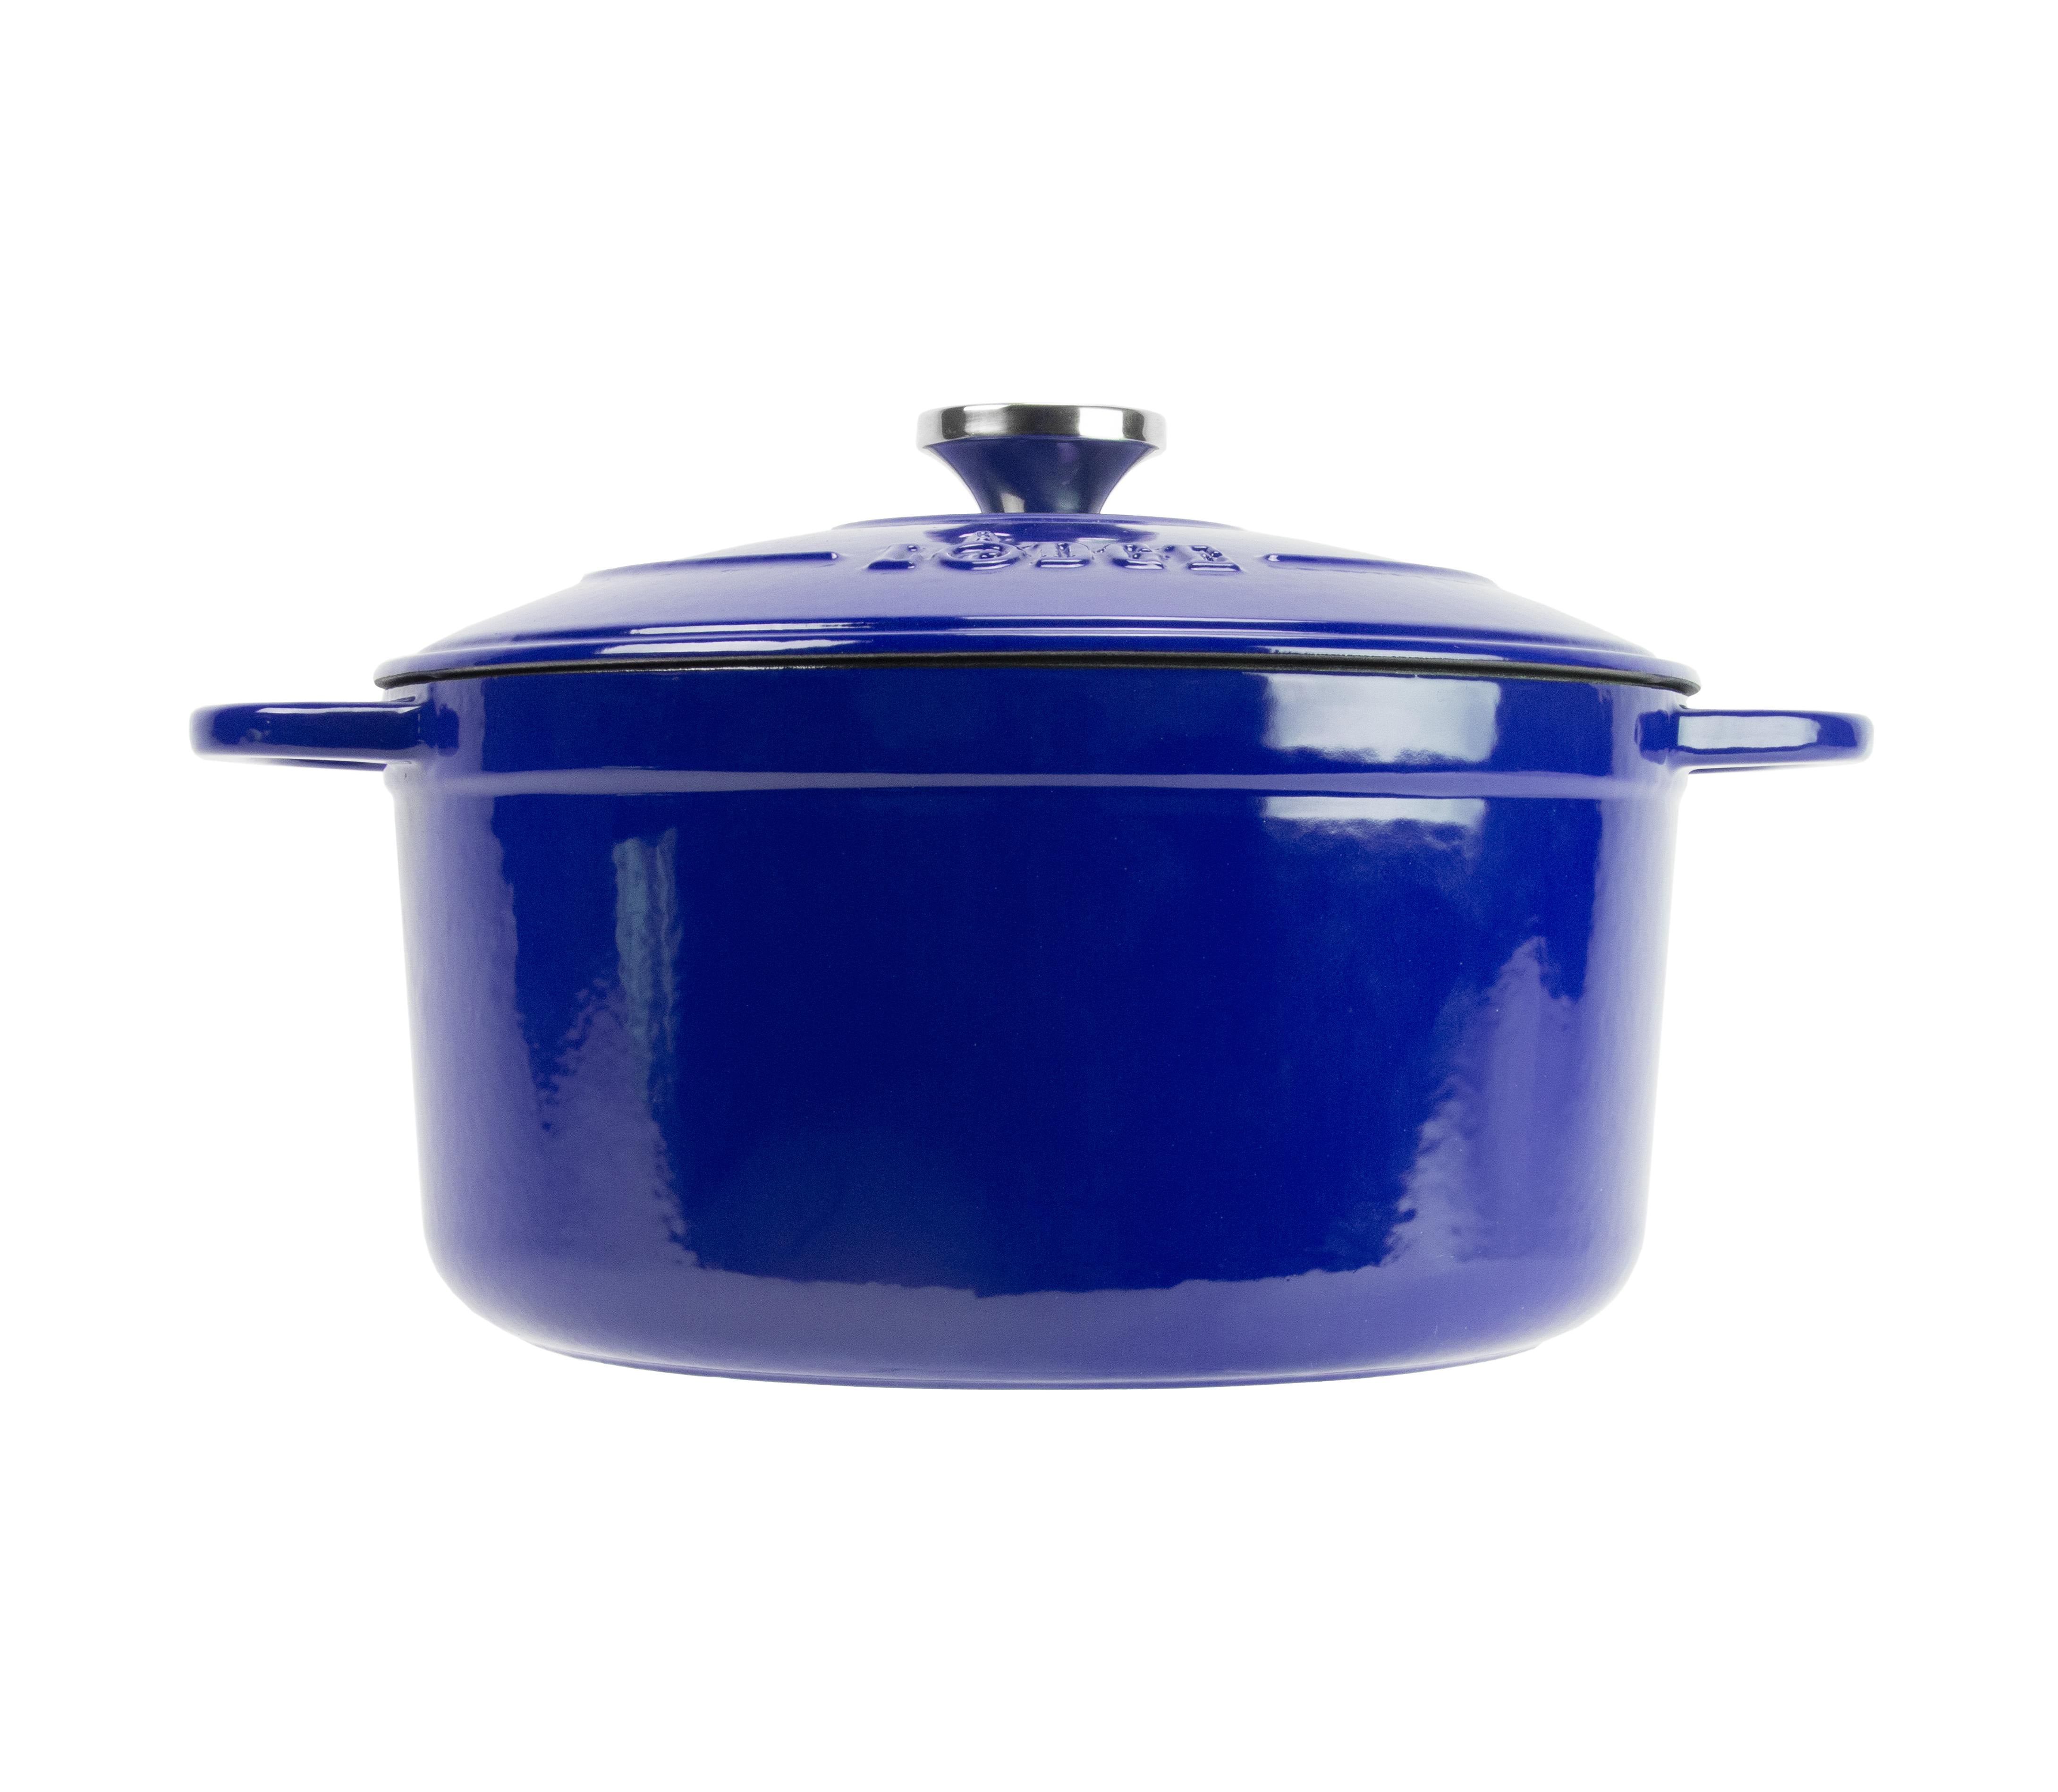 Lodge 6.5 qt Dutch oven, made in China, on sale at Walmart for $48.50. But  it looks different than all other lodge enameled DOs I've seen (usually  have the ombré color scheme).